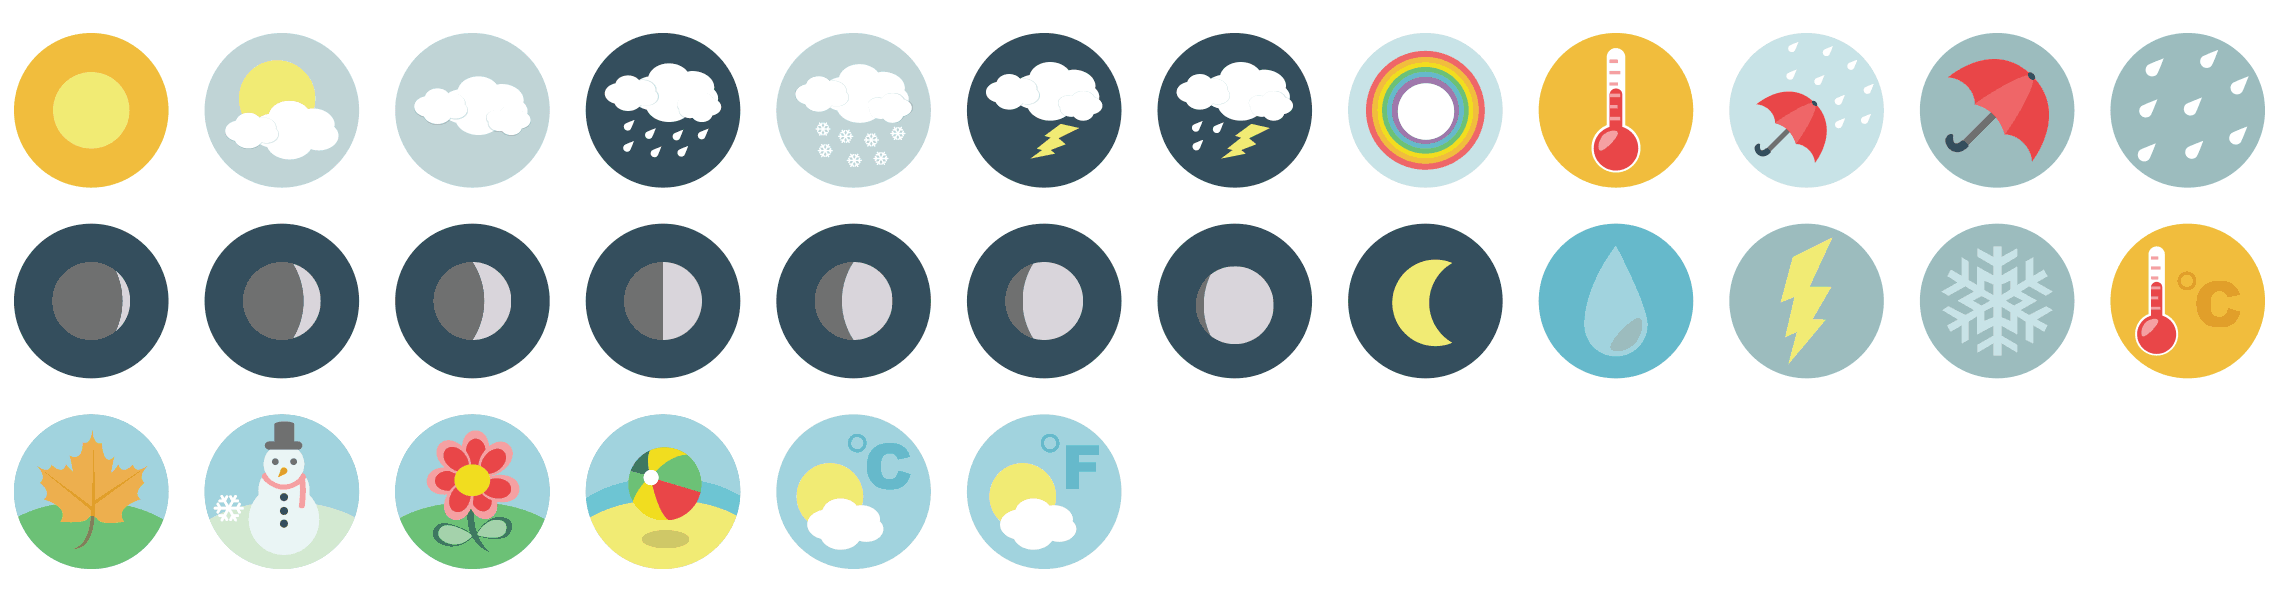 weather-flat-icons-vol-1-preview